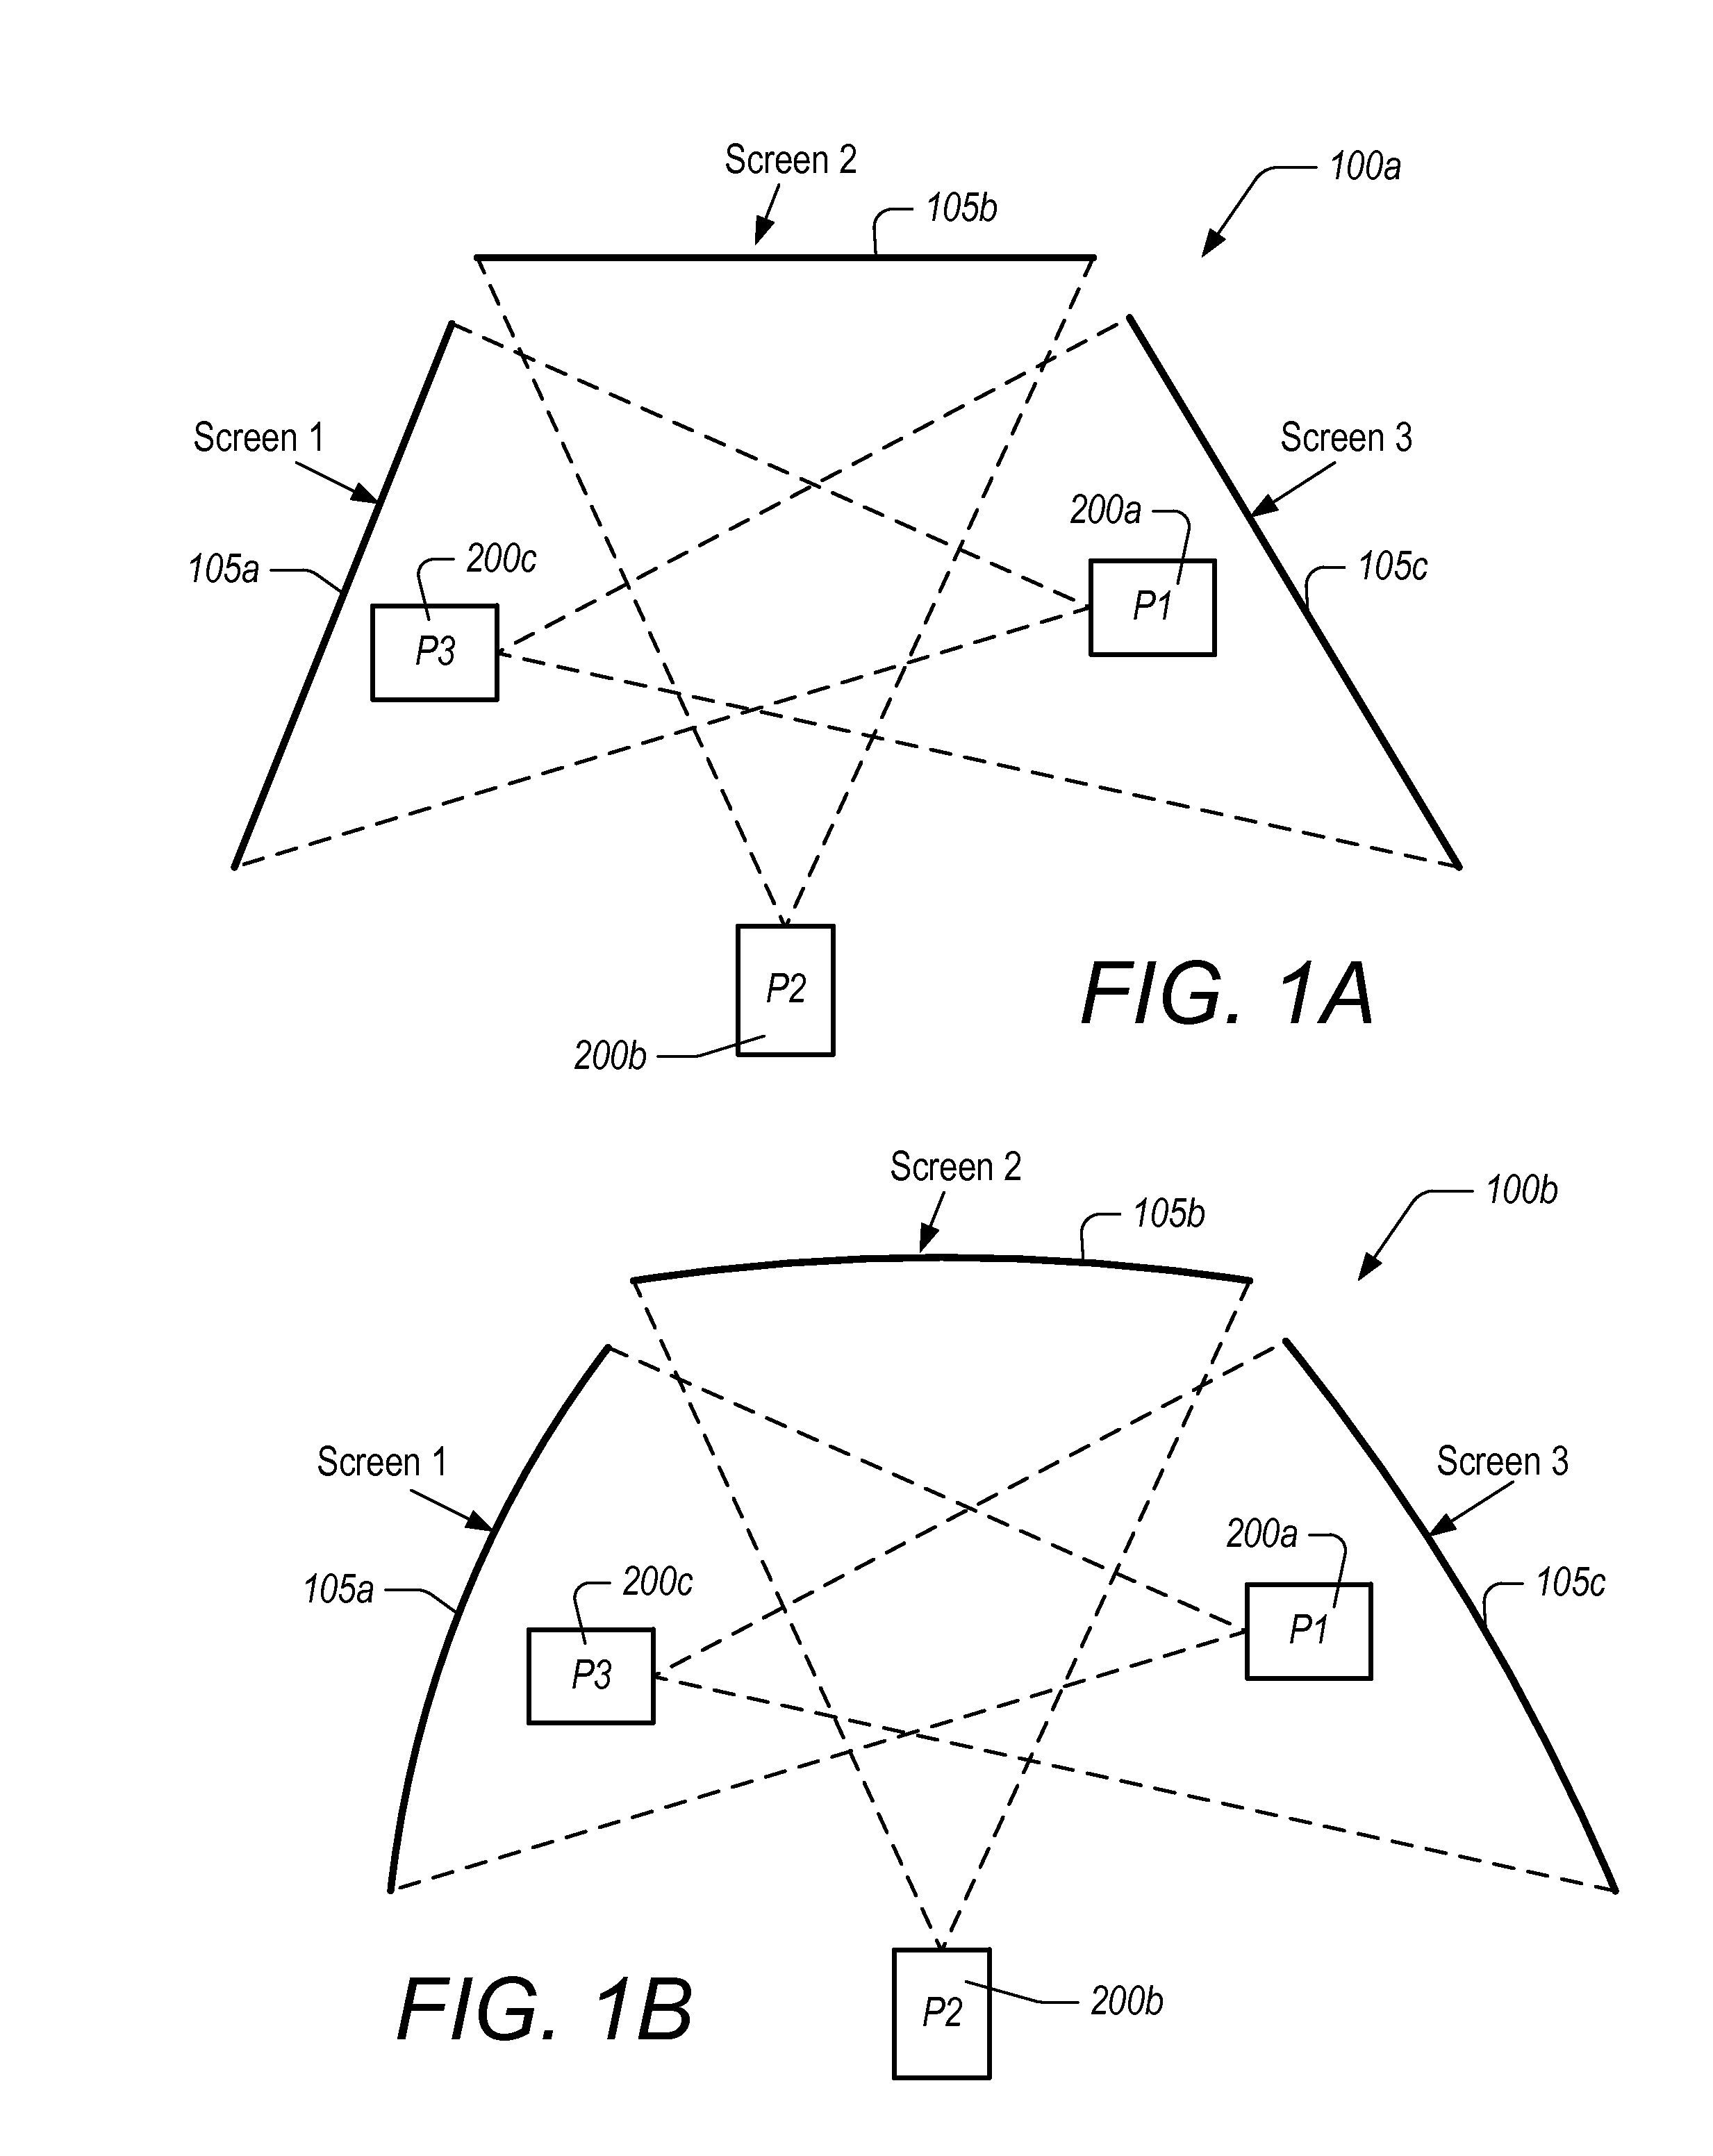 Display systems and methods employing wavelength multiplexing of colors